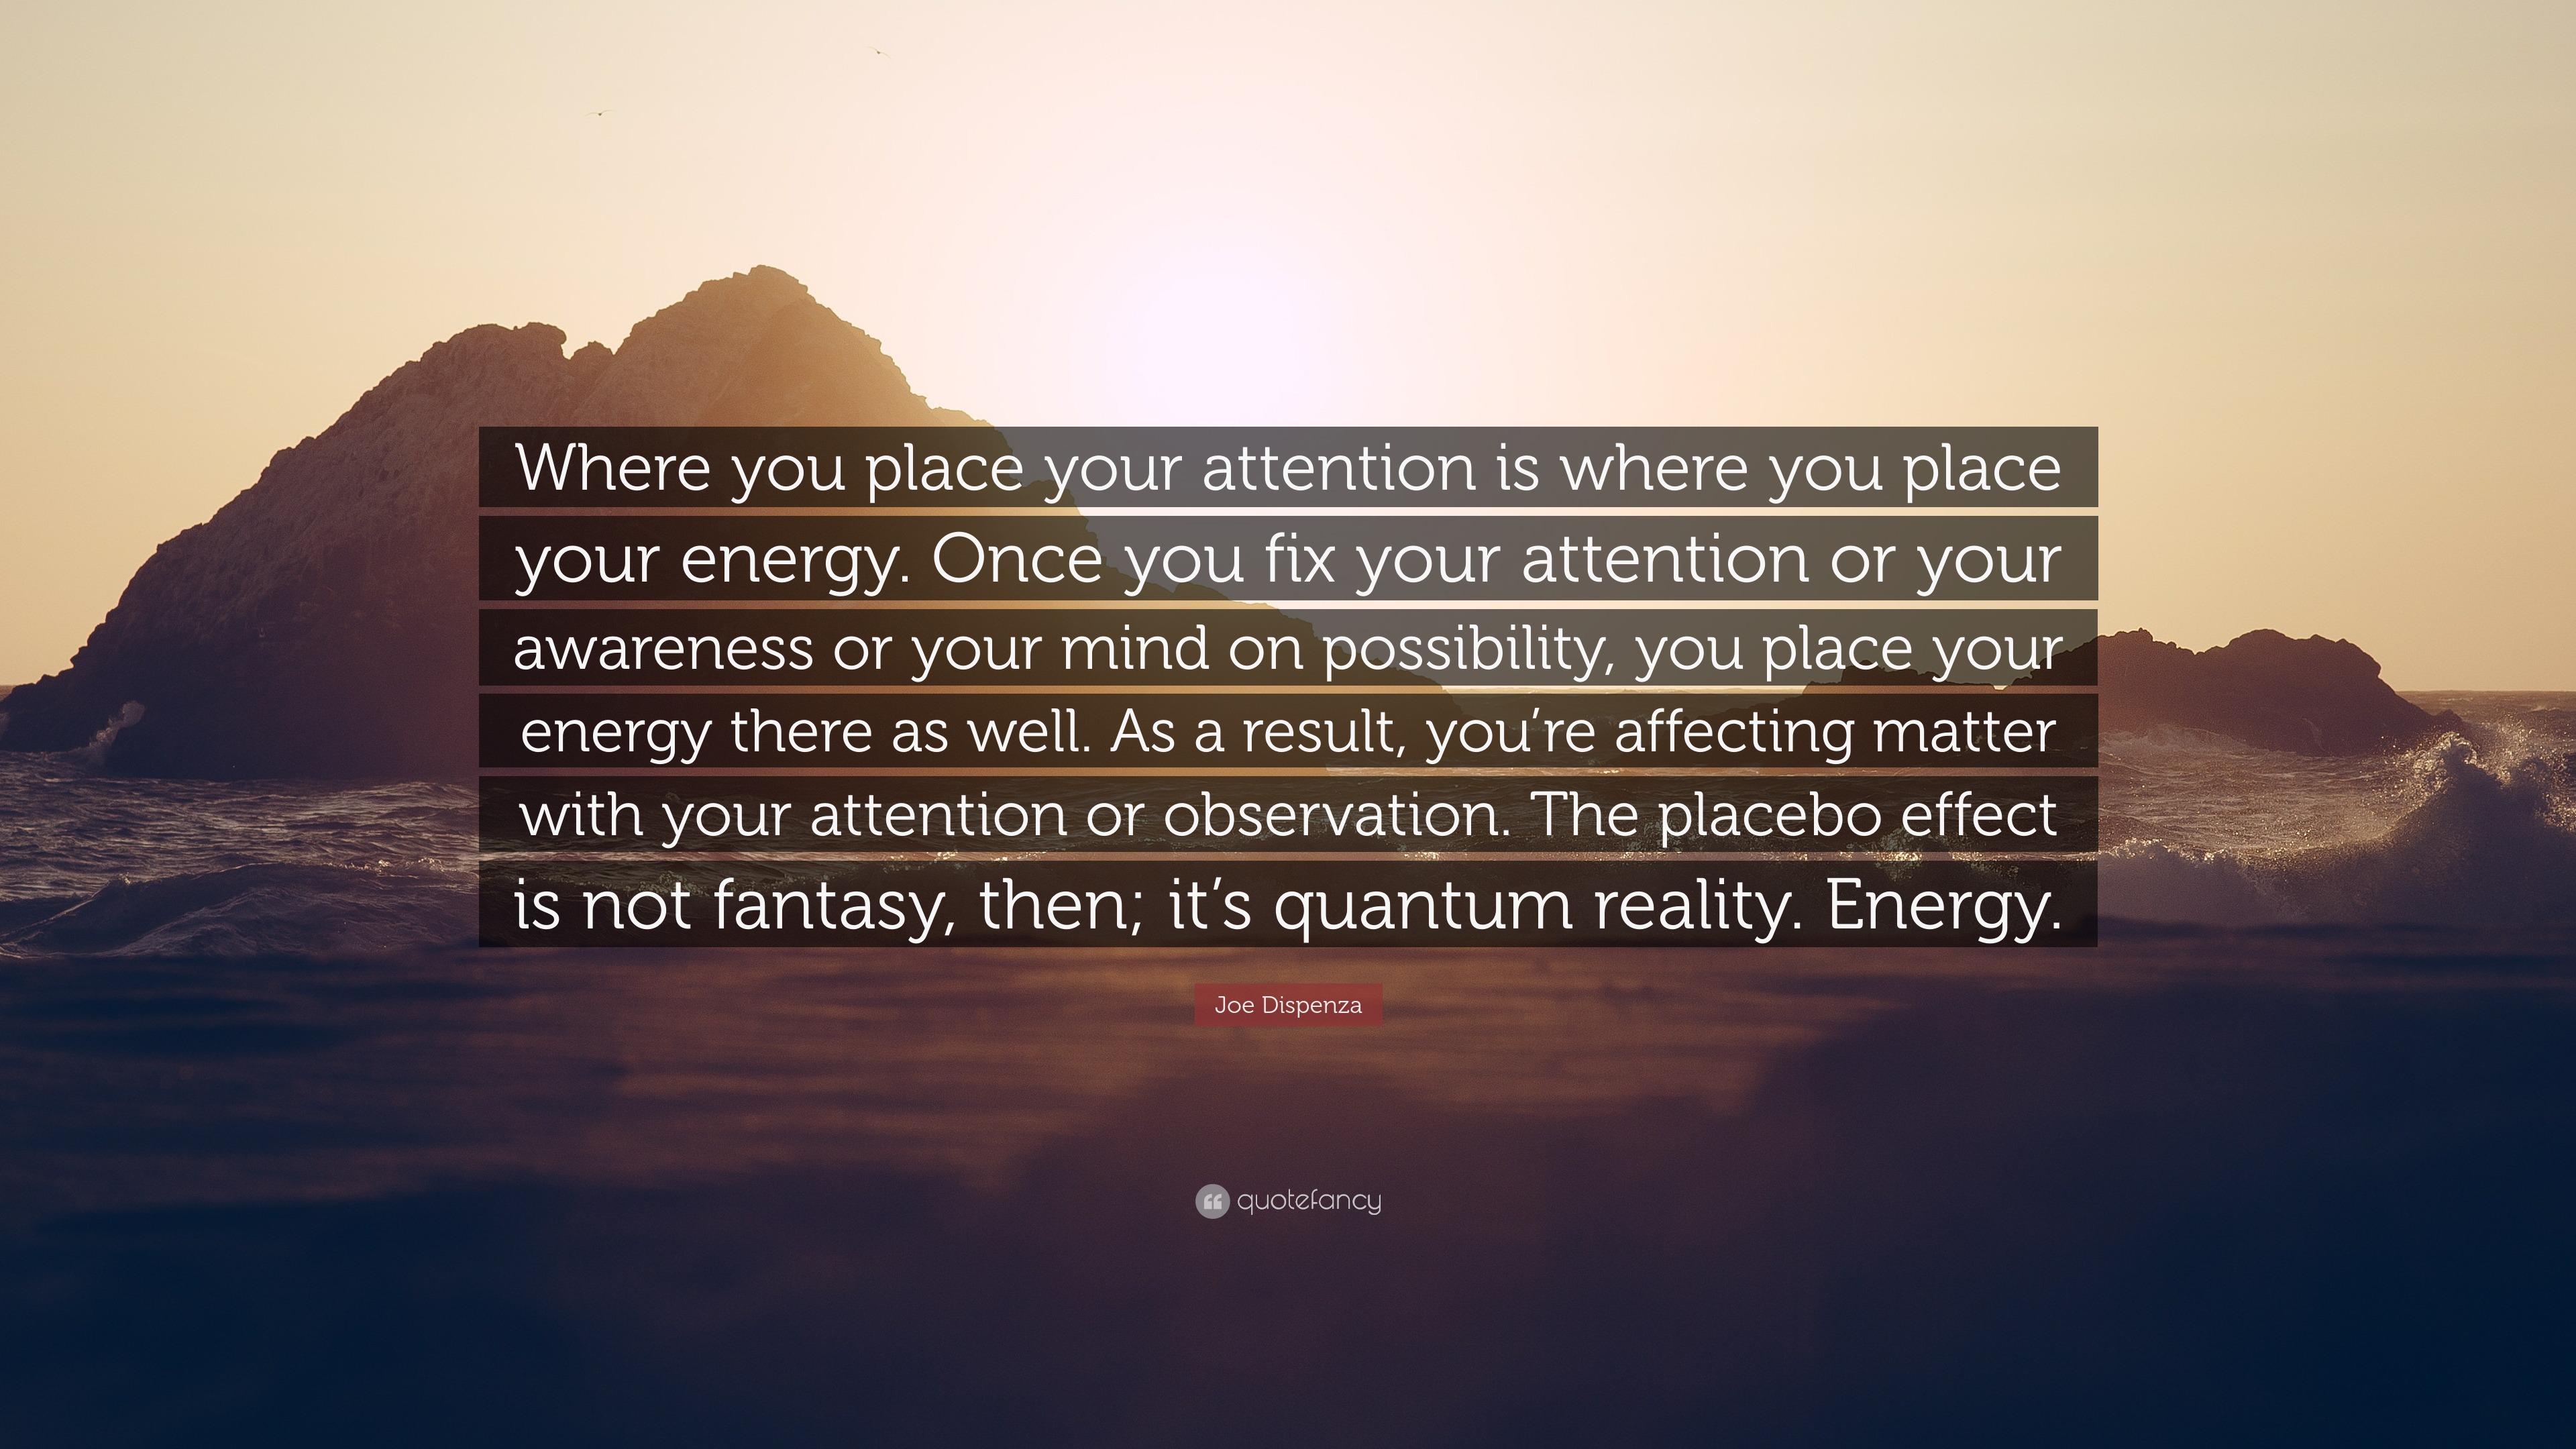 https://quotefancy.com/media/wallpaper/3840x2160/6670149-Joe-Dispenza-Quote-Where-you-place-your-attention-is-where-you.jpg